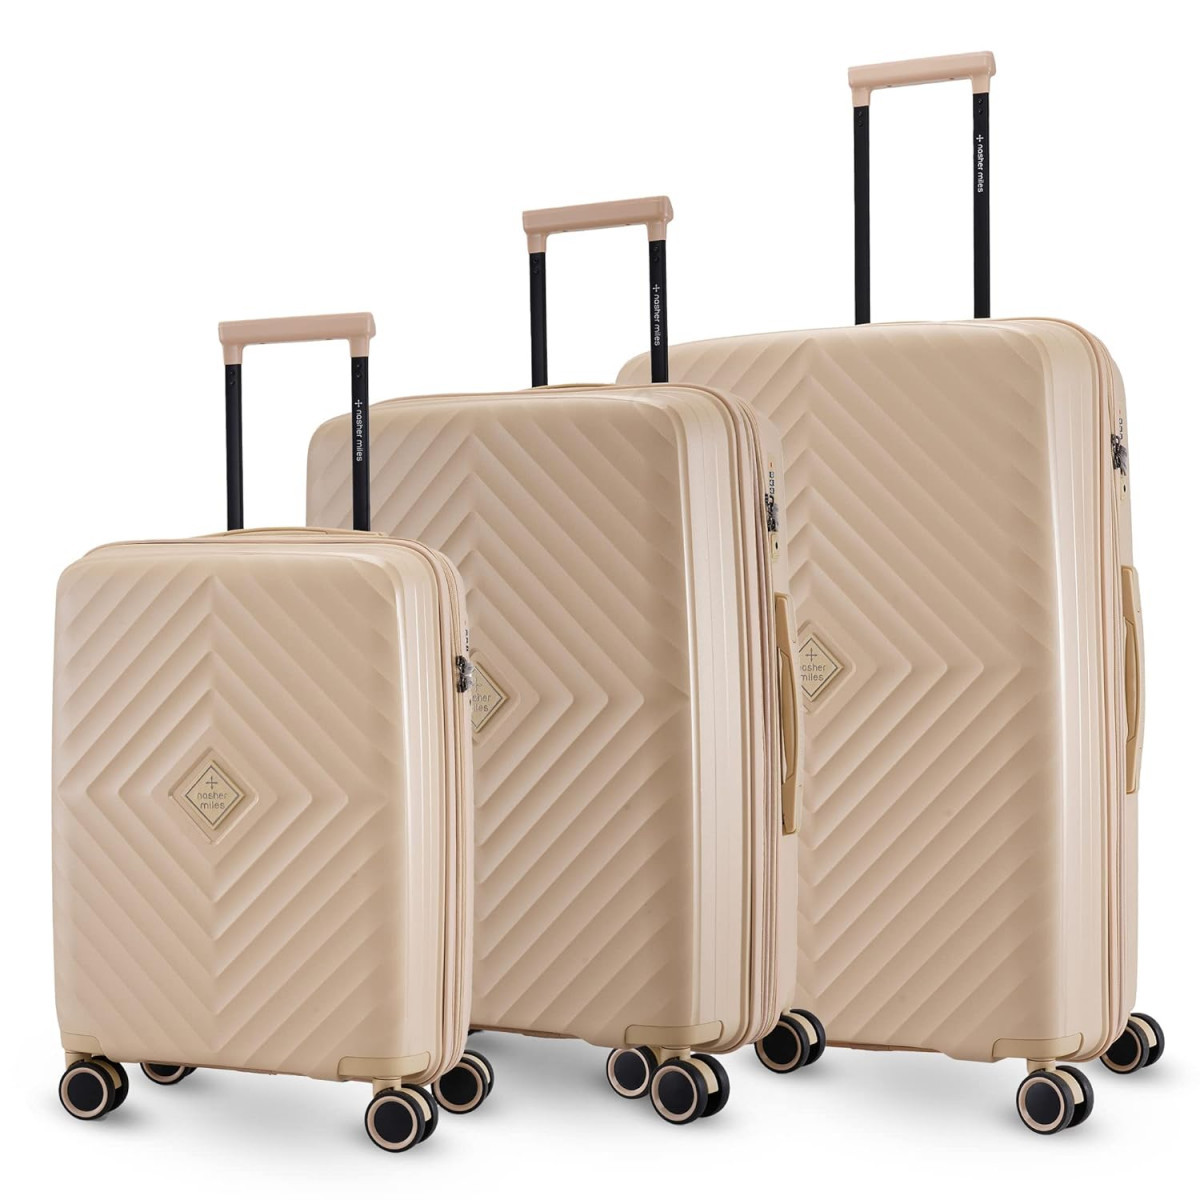 Nasher Miles Antwerp Expander Hard-Sided Polypropylene Luggage Set of 3 Yellow Trolley Bags 55 65  75 Cm